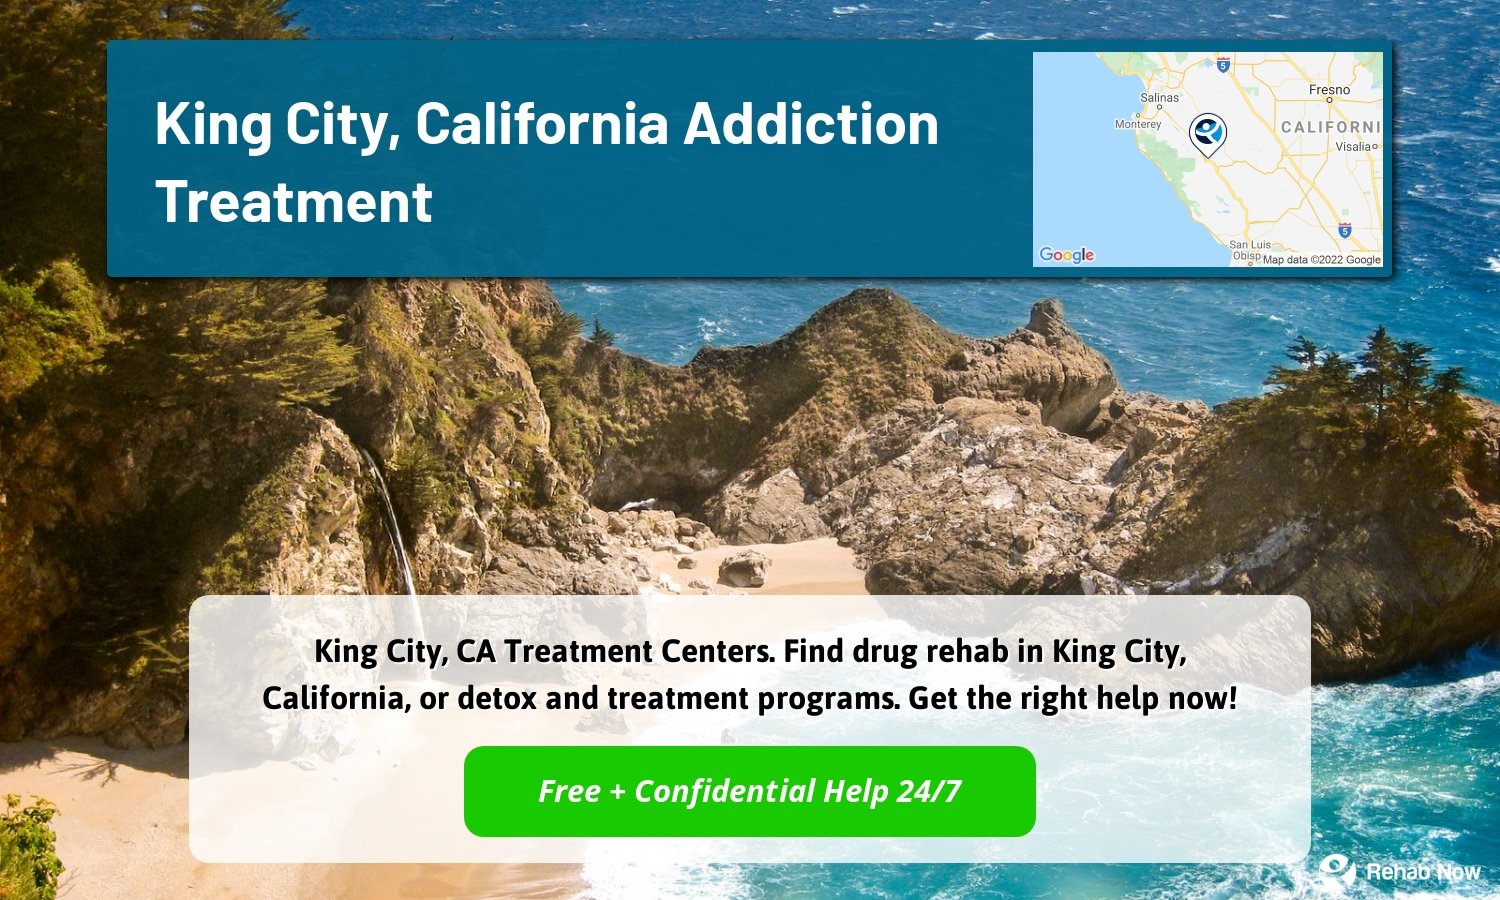 King City, CA Treatment Centers. Find drug rehab in King City, California, or detox and treatment programs. Get the right help now!